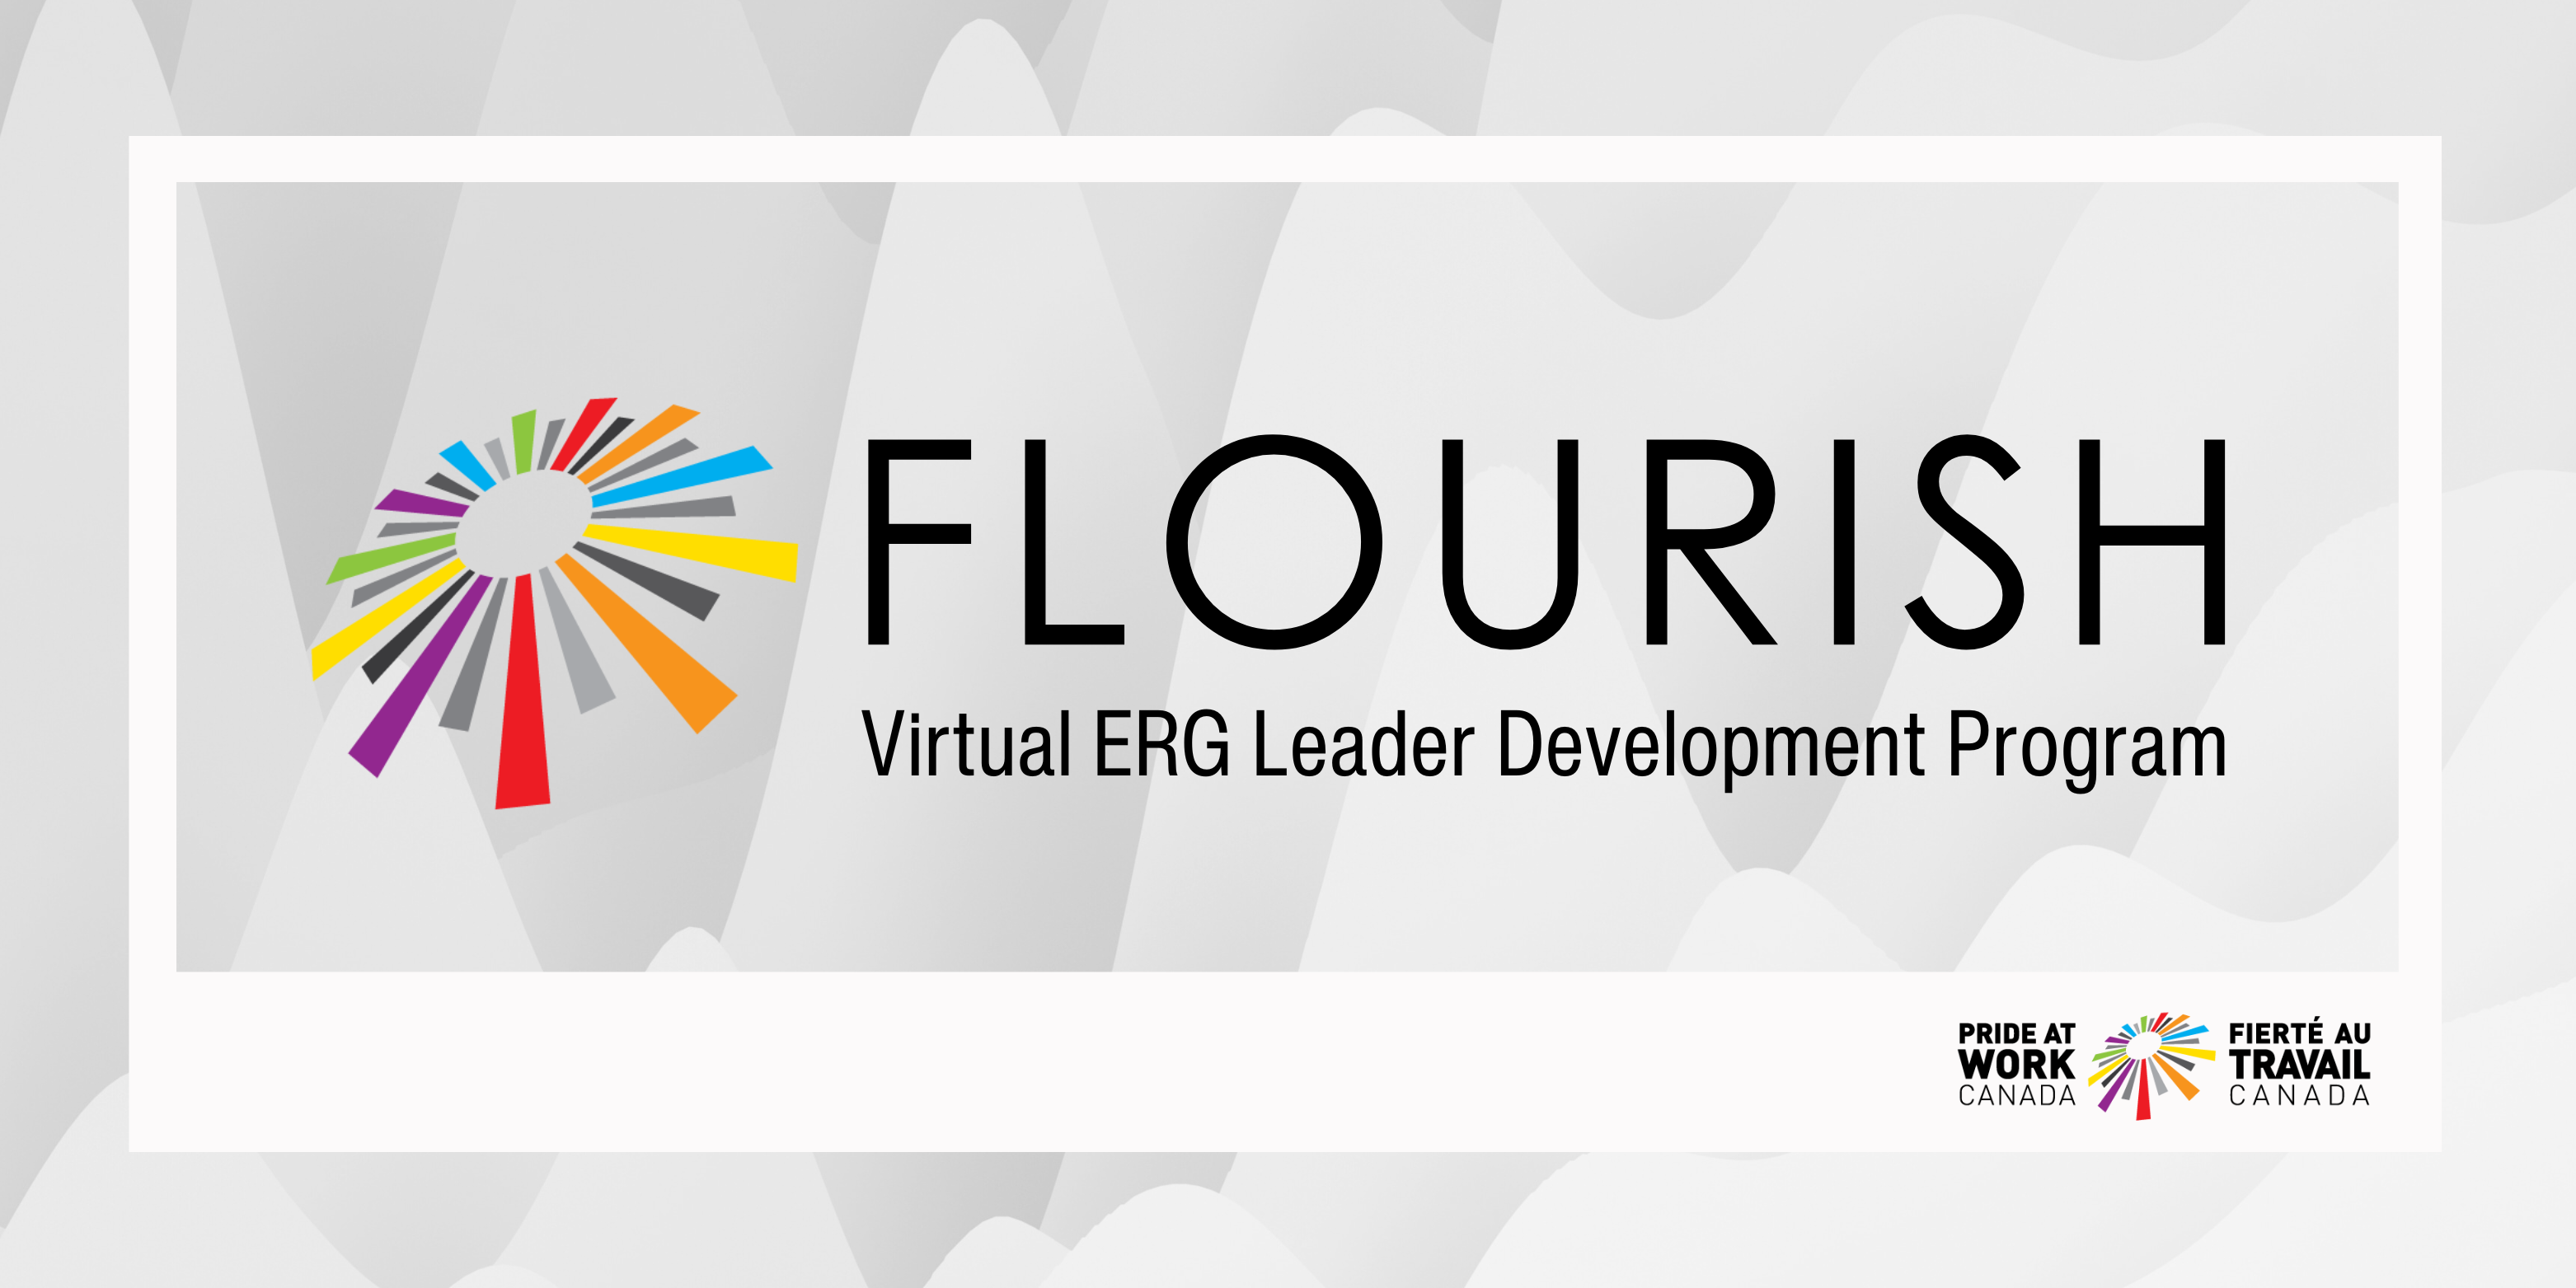 FLOURISH banner with the text Virtual ERG Leader Development Program and Pride at Work Canada logo.